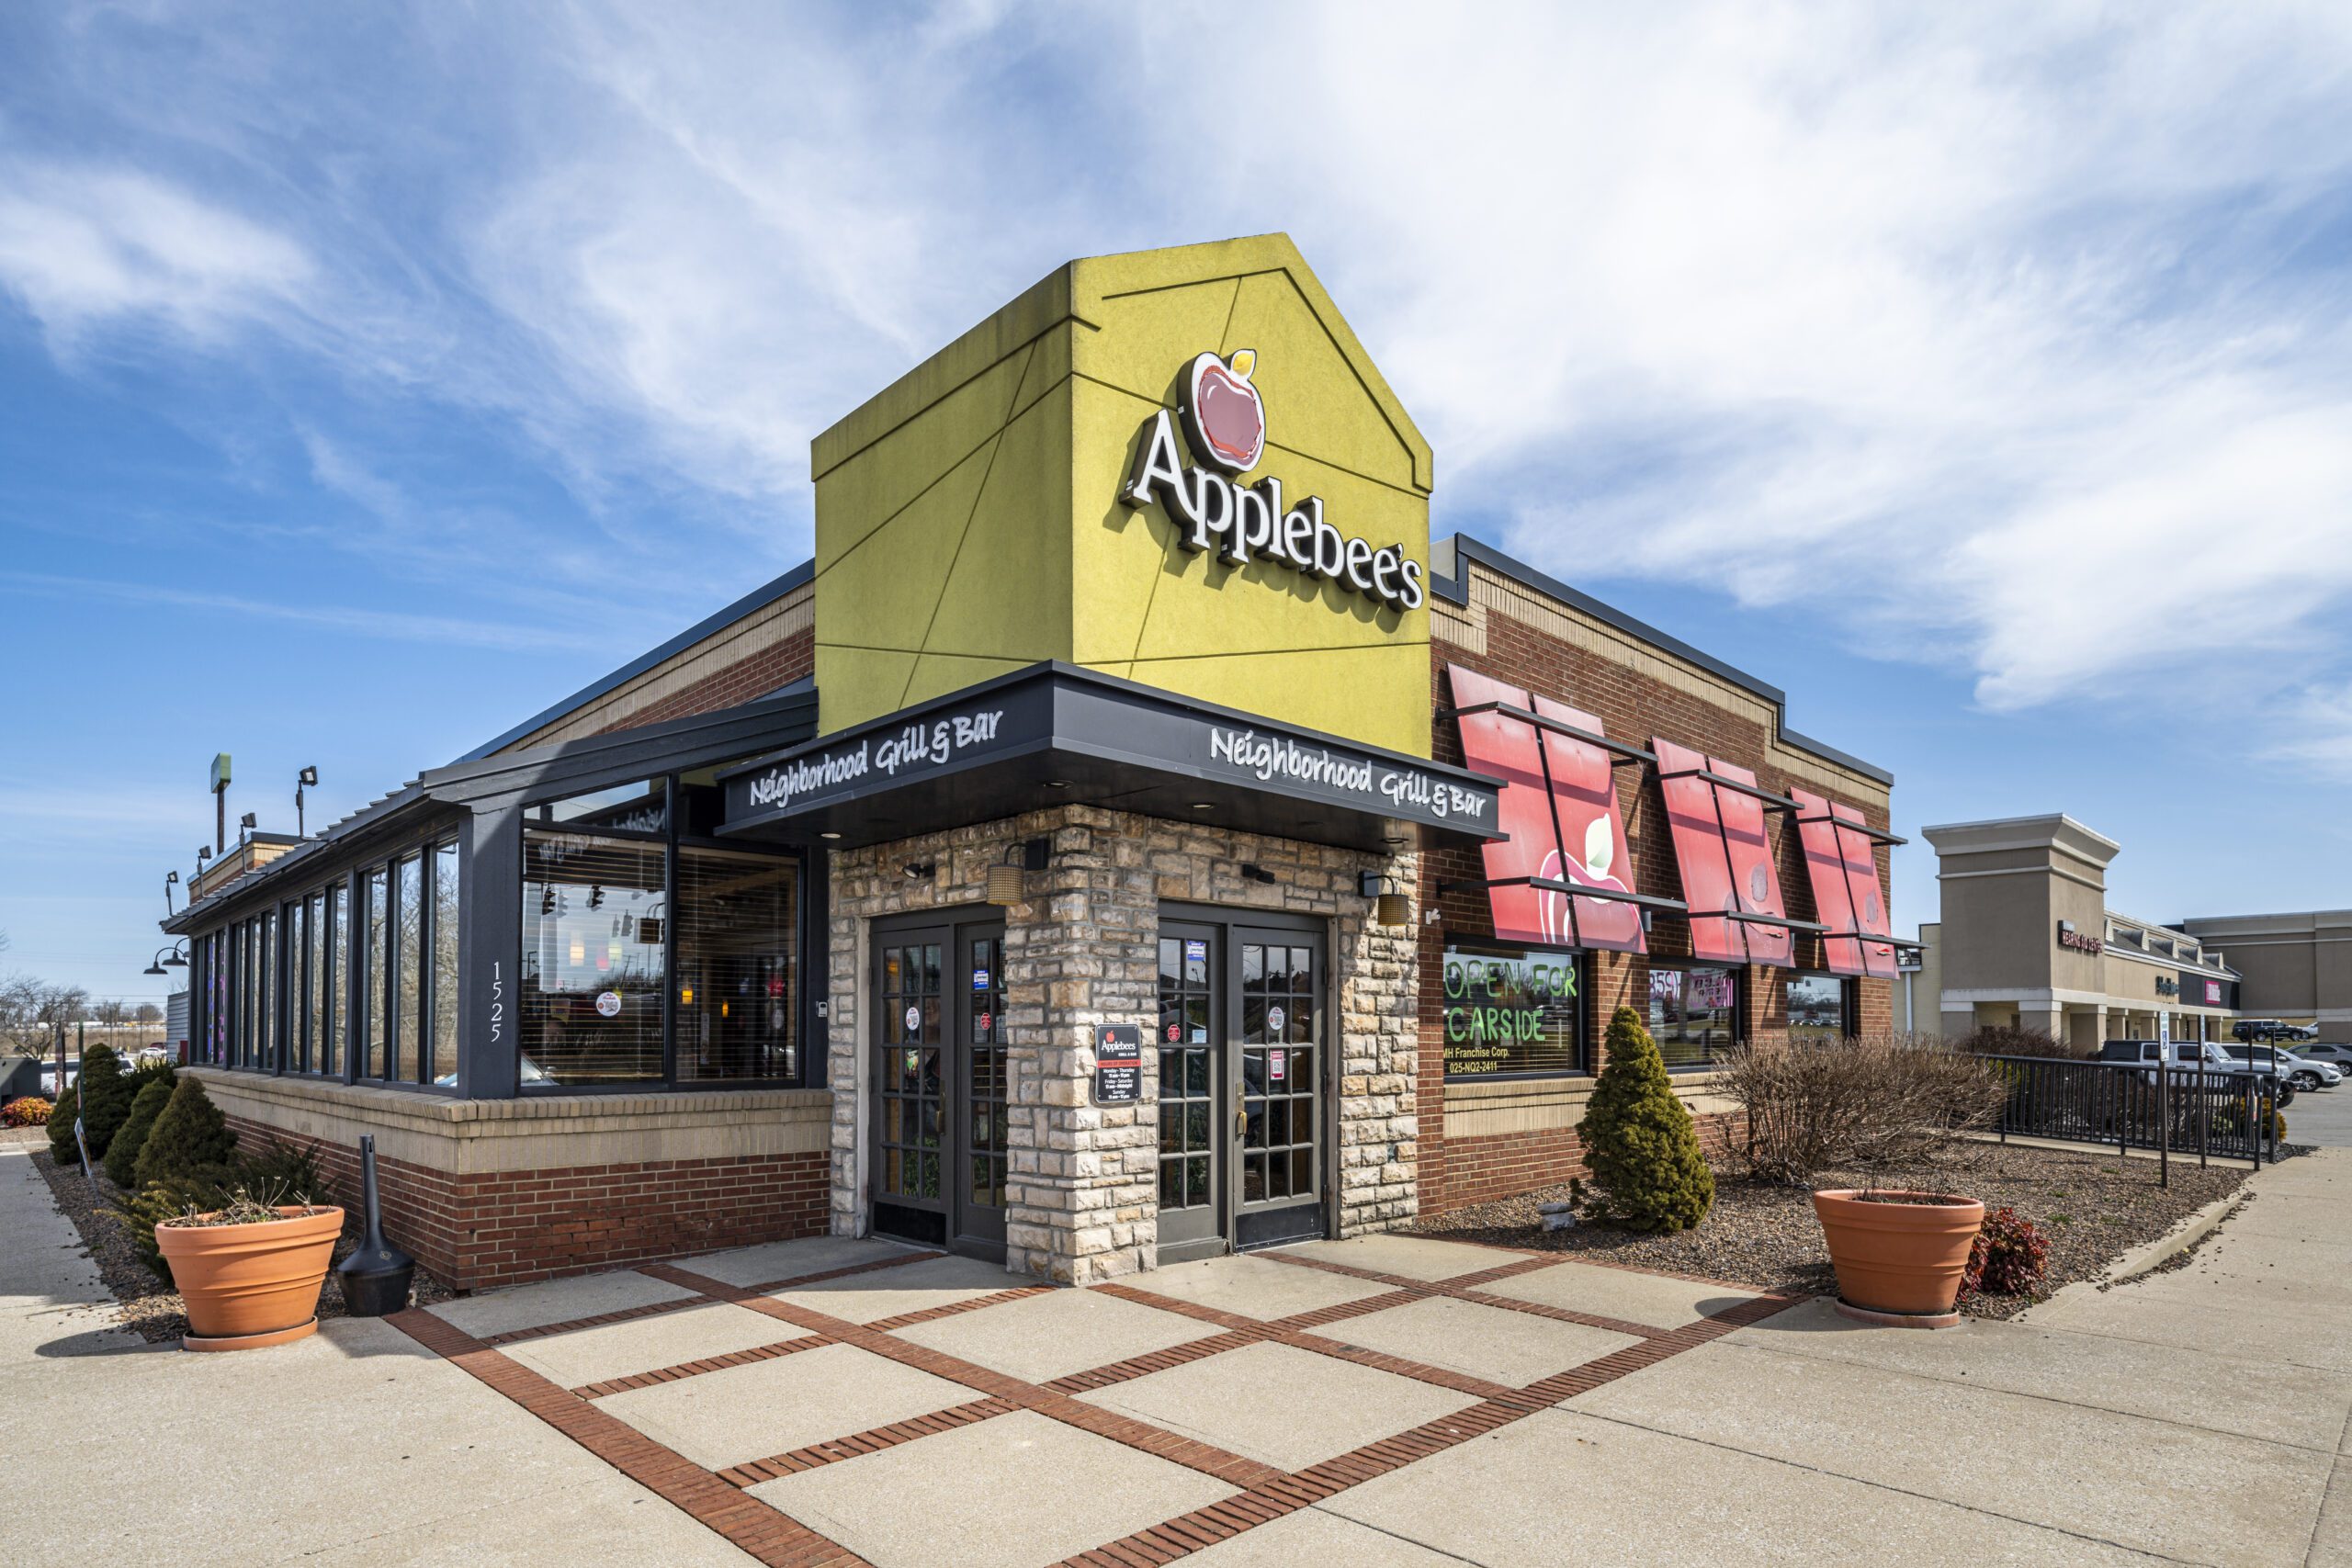 Applebee’s<br><span class='location'>Winchester, KY</span>